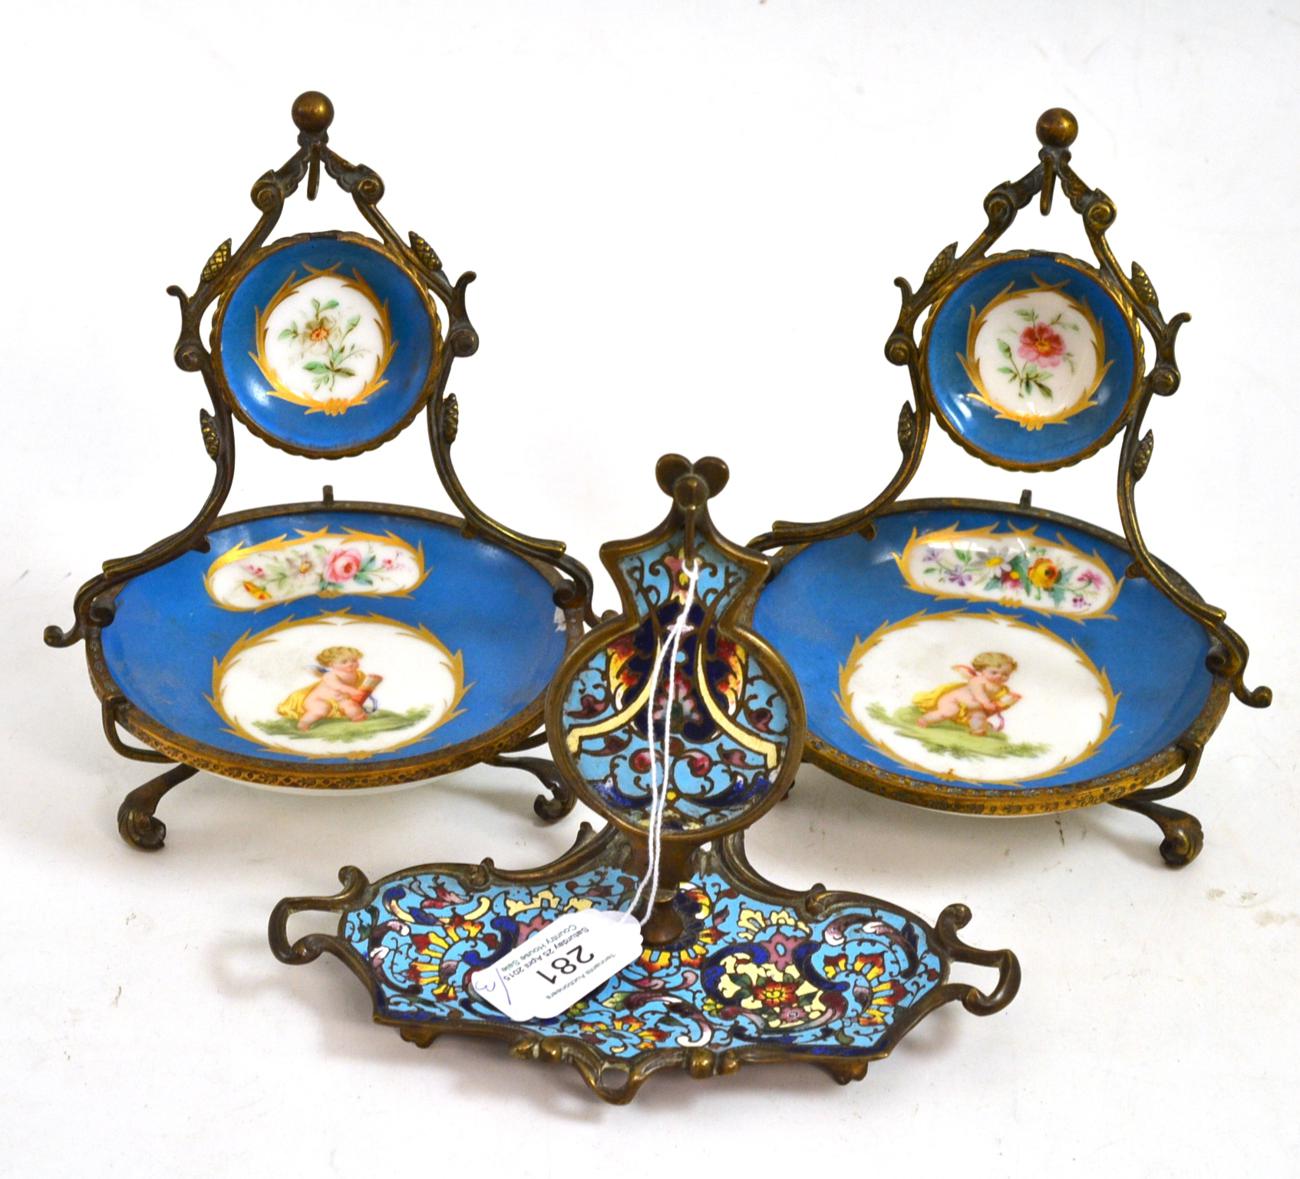 A champleve watch stand, 13cm high, and a pair of Sevres-style watch stands, 16cm high Damage